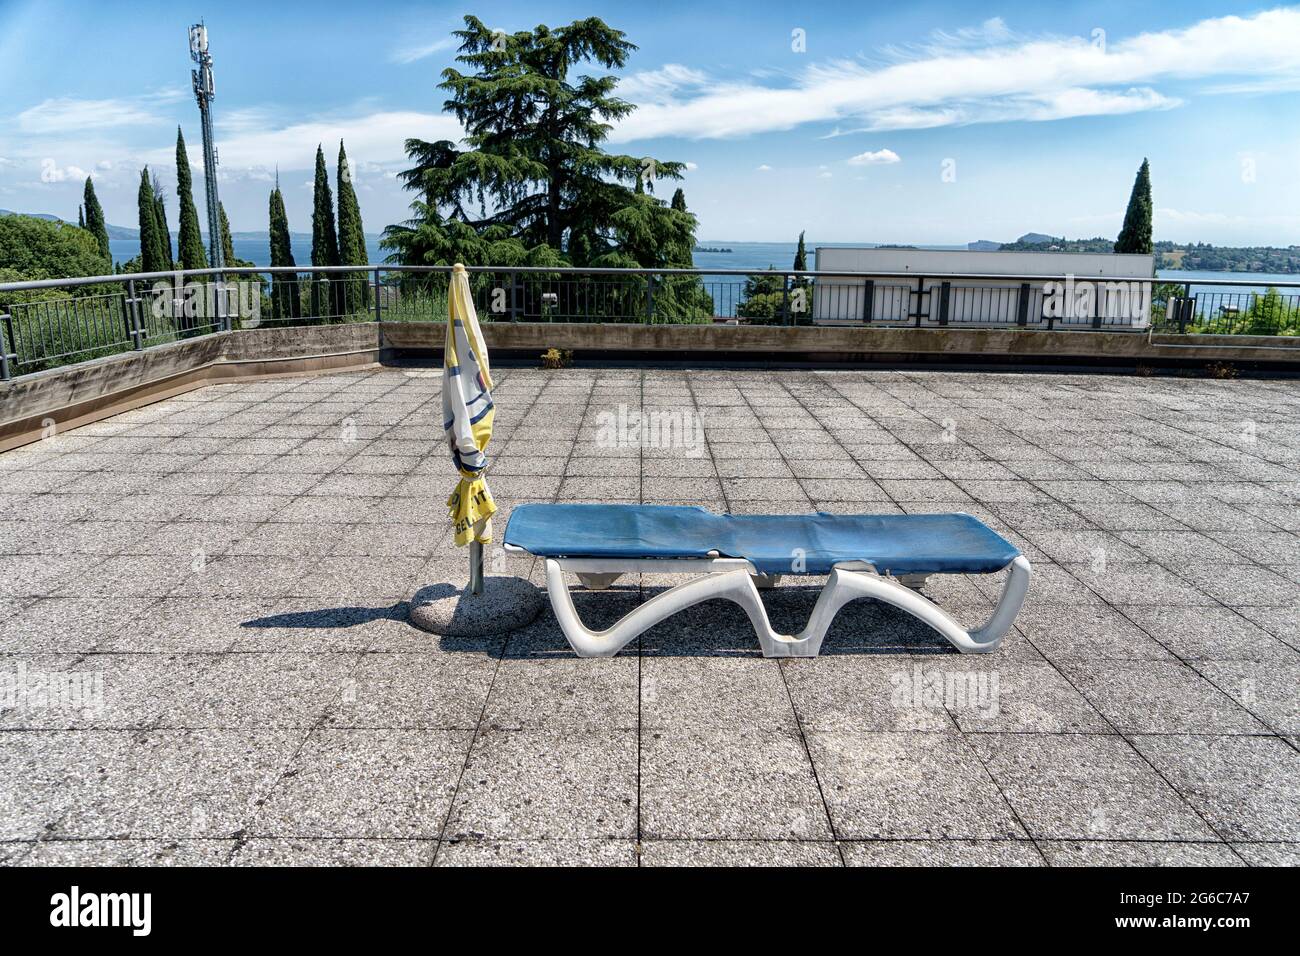 Abandoned sunlounger an parasol on a rooftop in the city of Gardone Riviera at the shore of Garda Lake in Lombardy, Italy Stock Photo